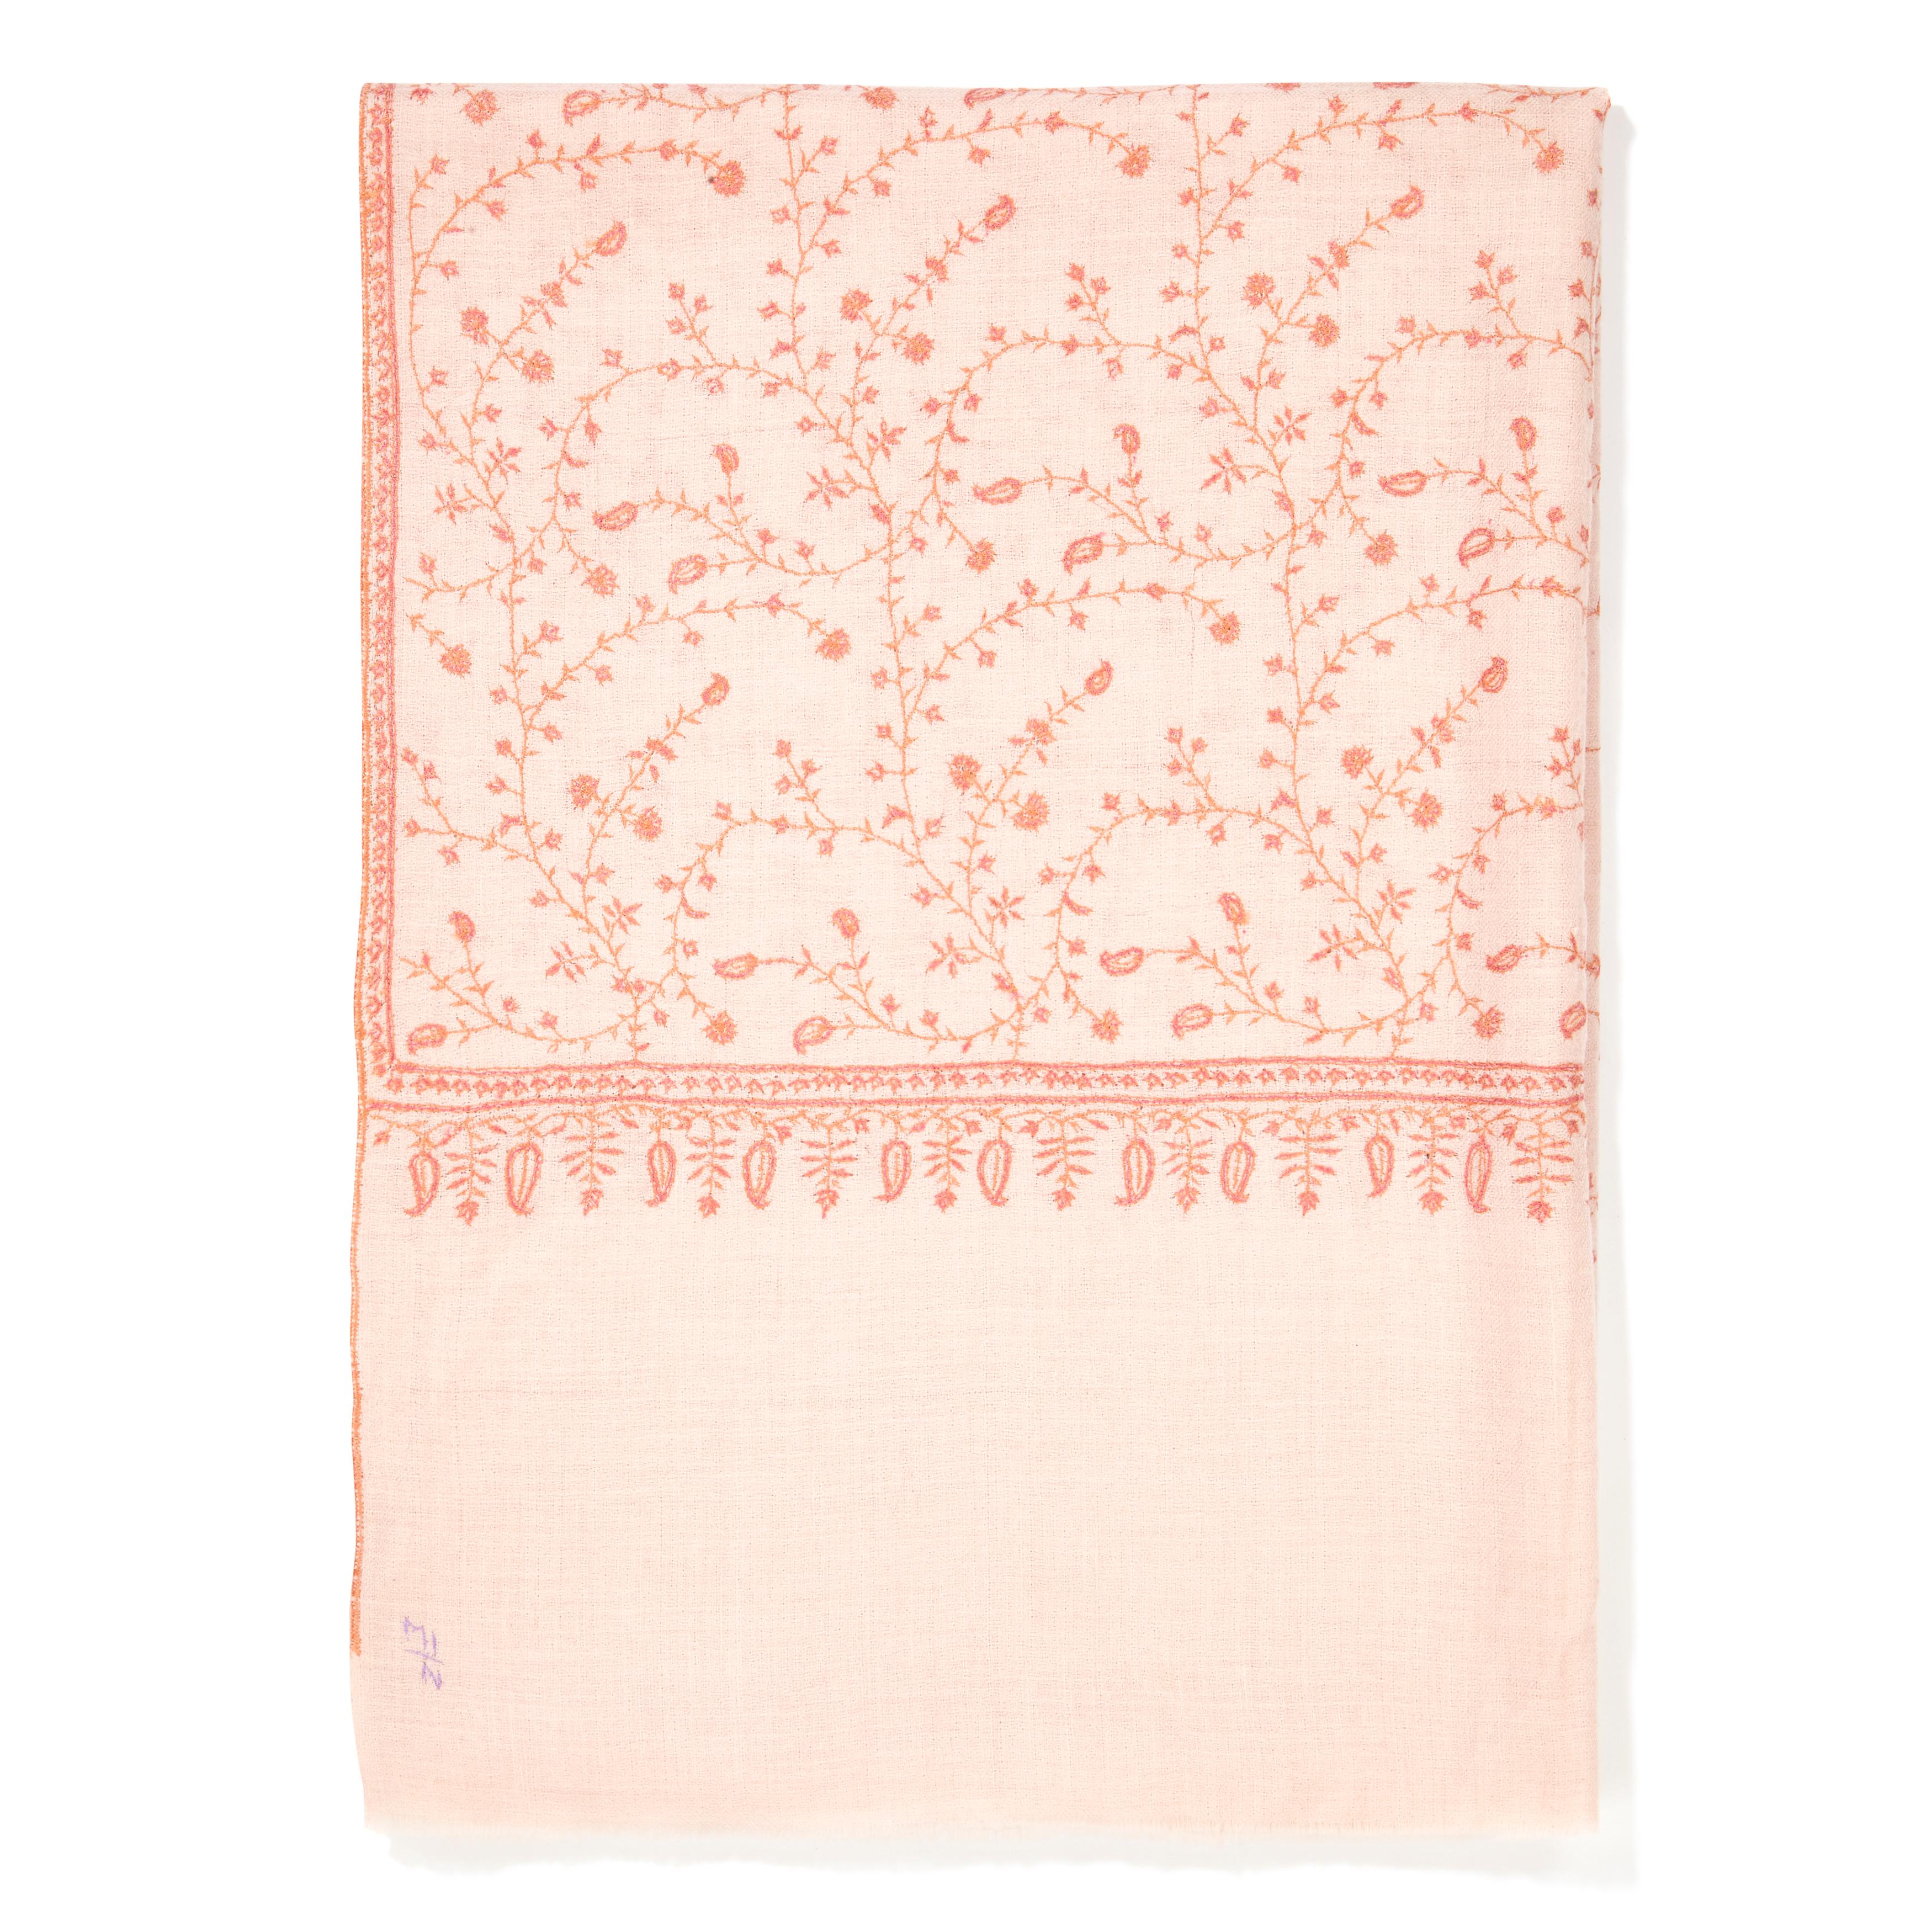 The perfect Christmas gift for someone special - this shawl is unique and handmade. 
Verheyen London’s shawl is spun from the finest embroidered woven cashmere from Kashmir.  The embroidery can take up to 1 year to embroider these shawls and each